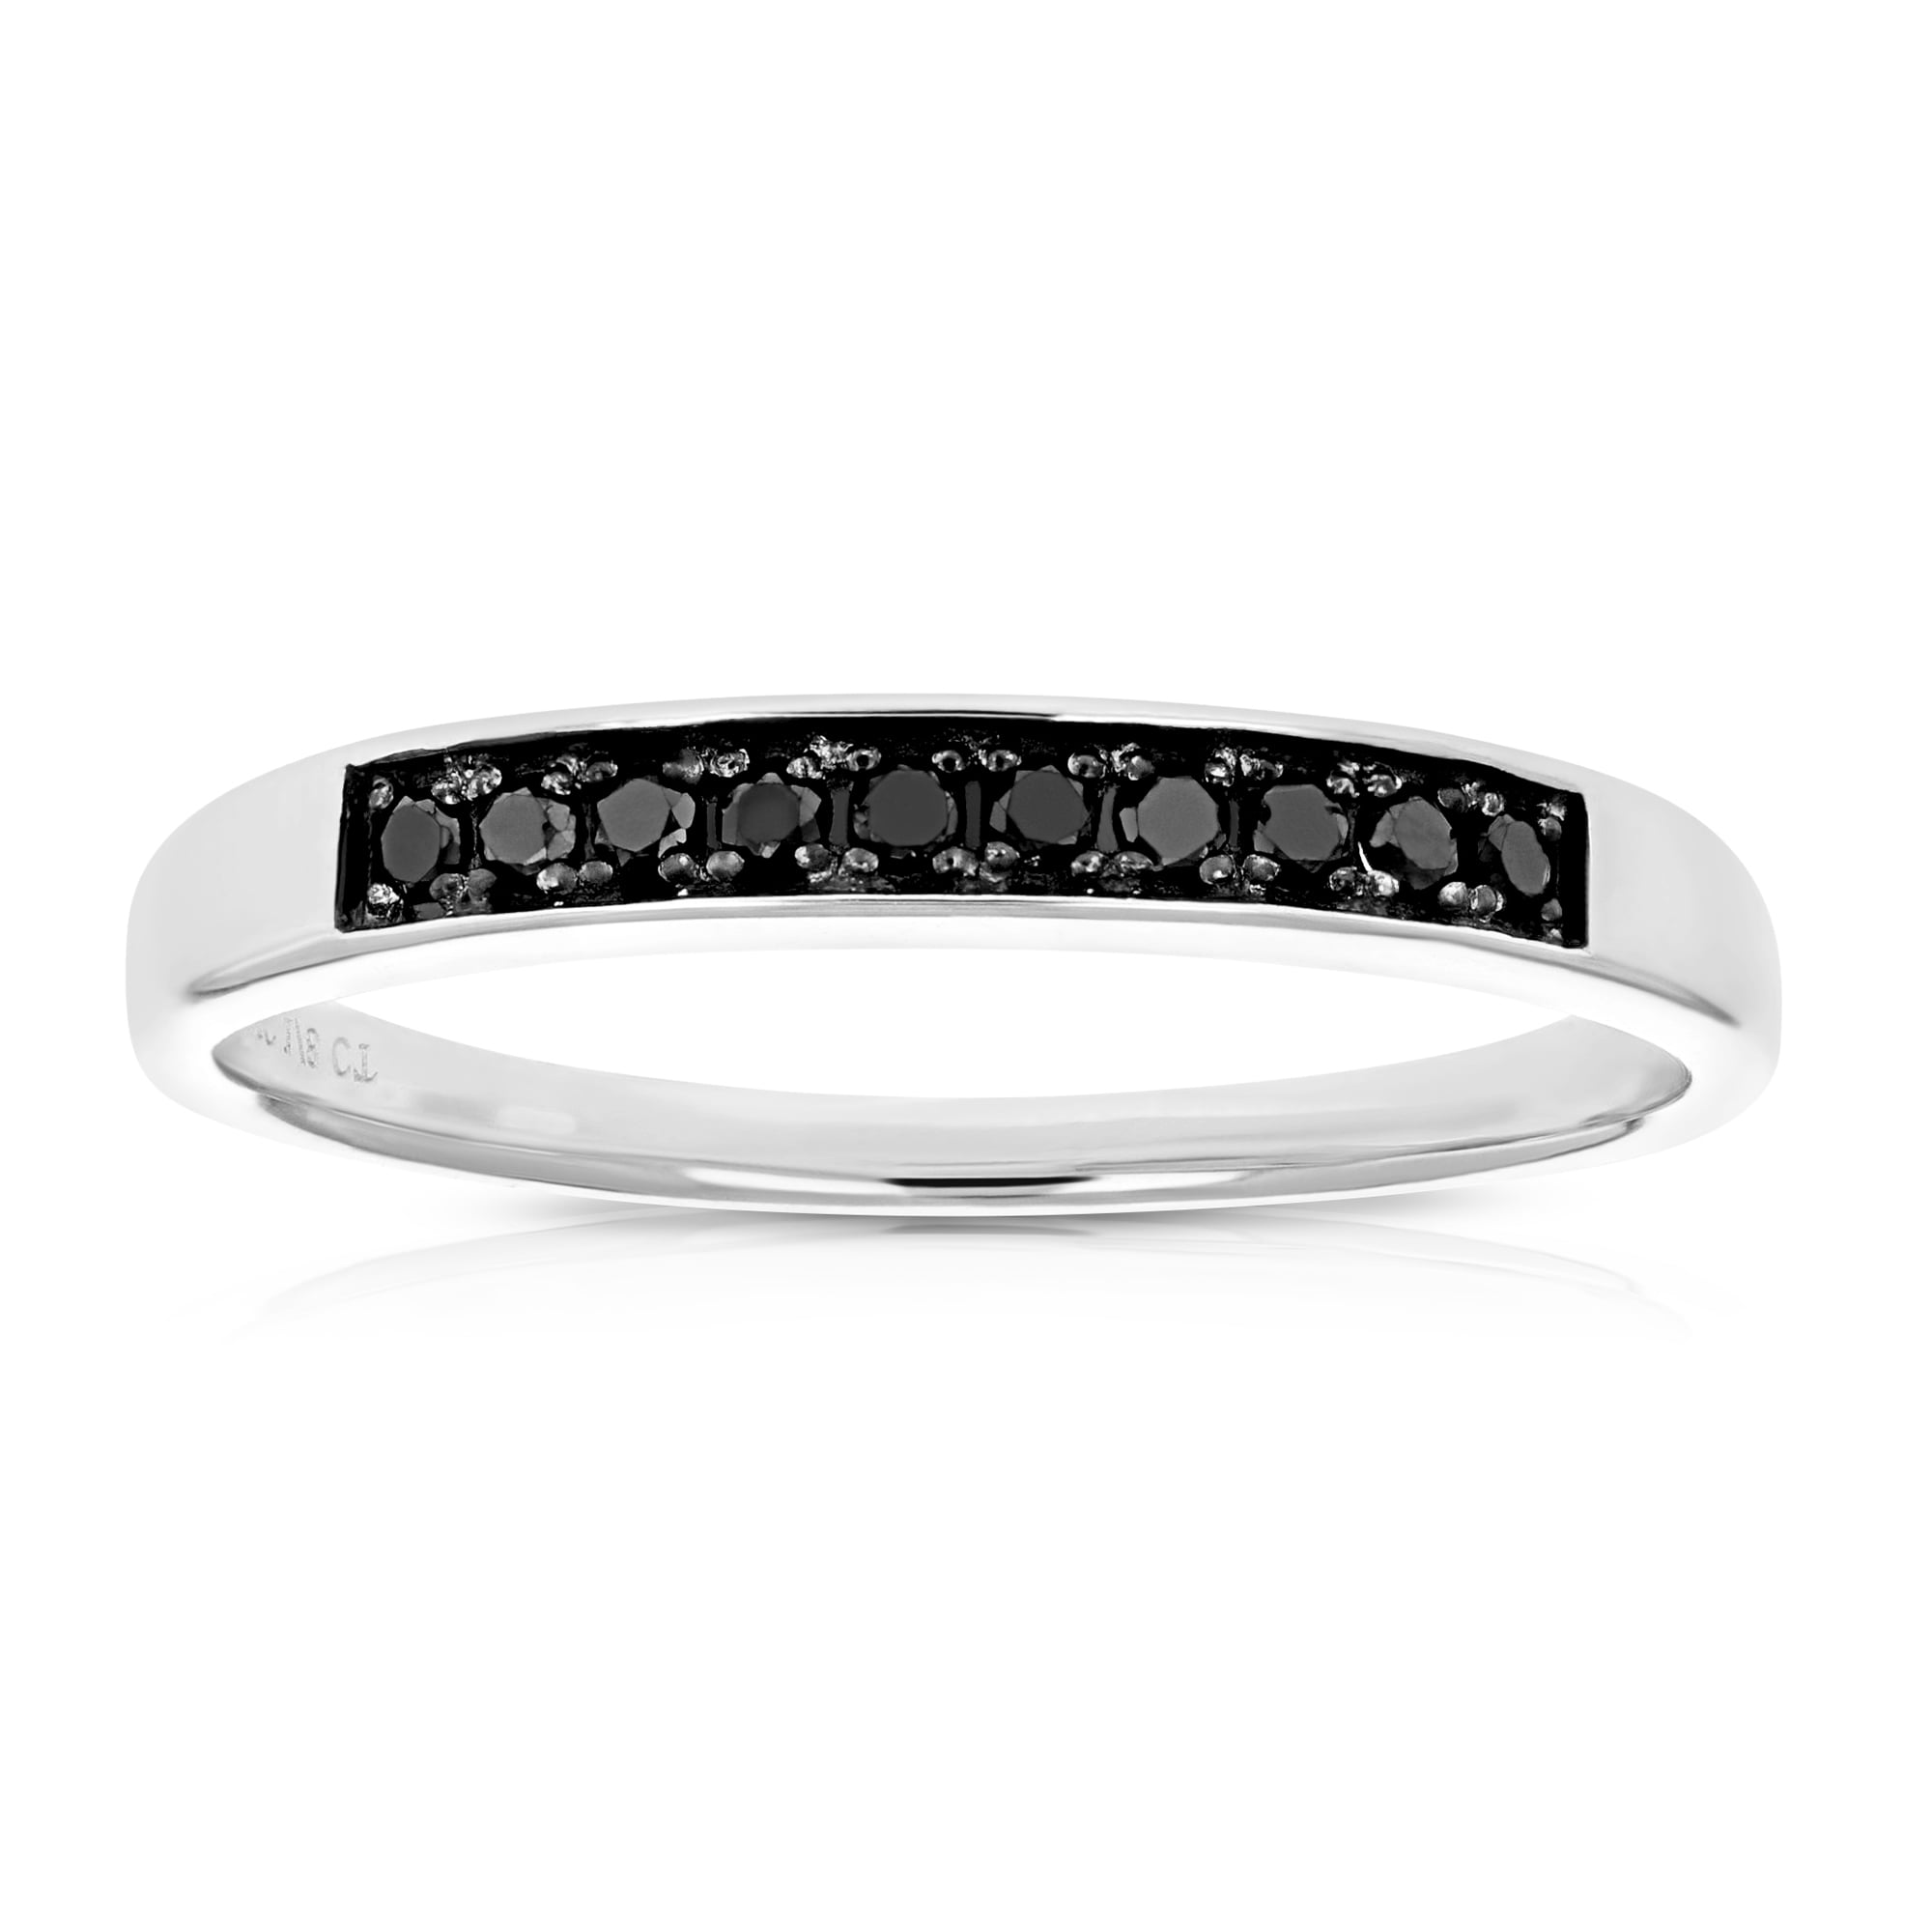 1/8 cttw Black Diamond Ring Wedding Band in .925 Sterling Silver 20 Stones 